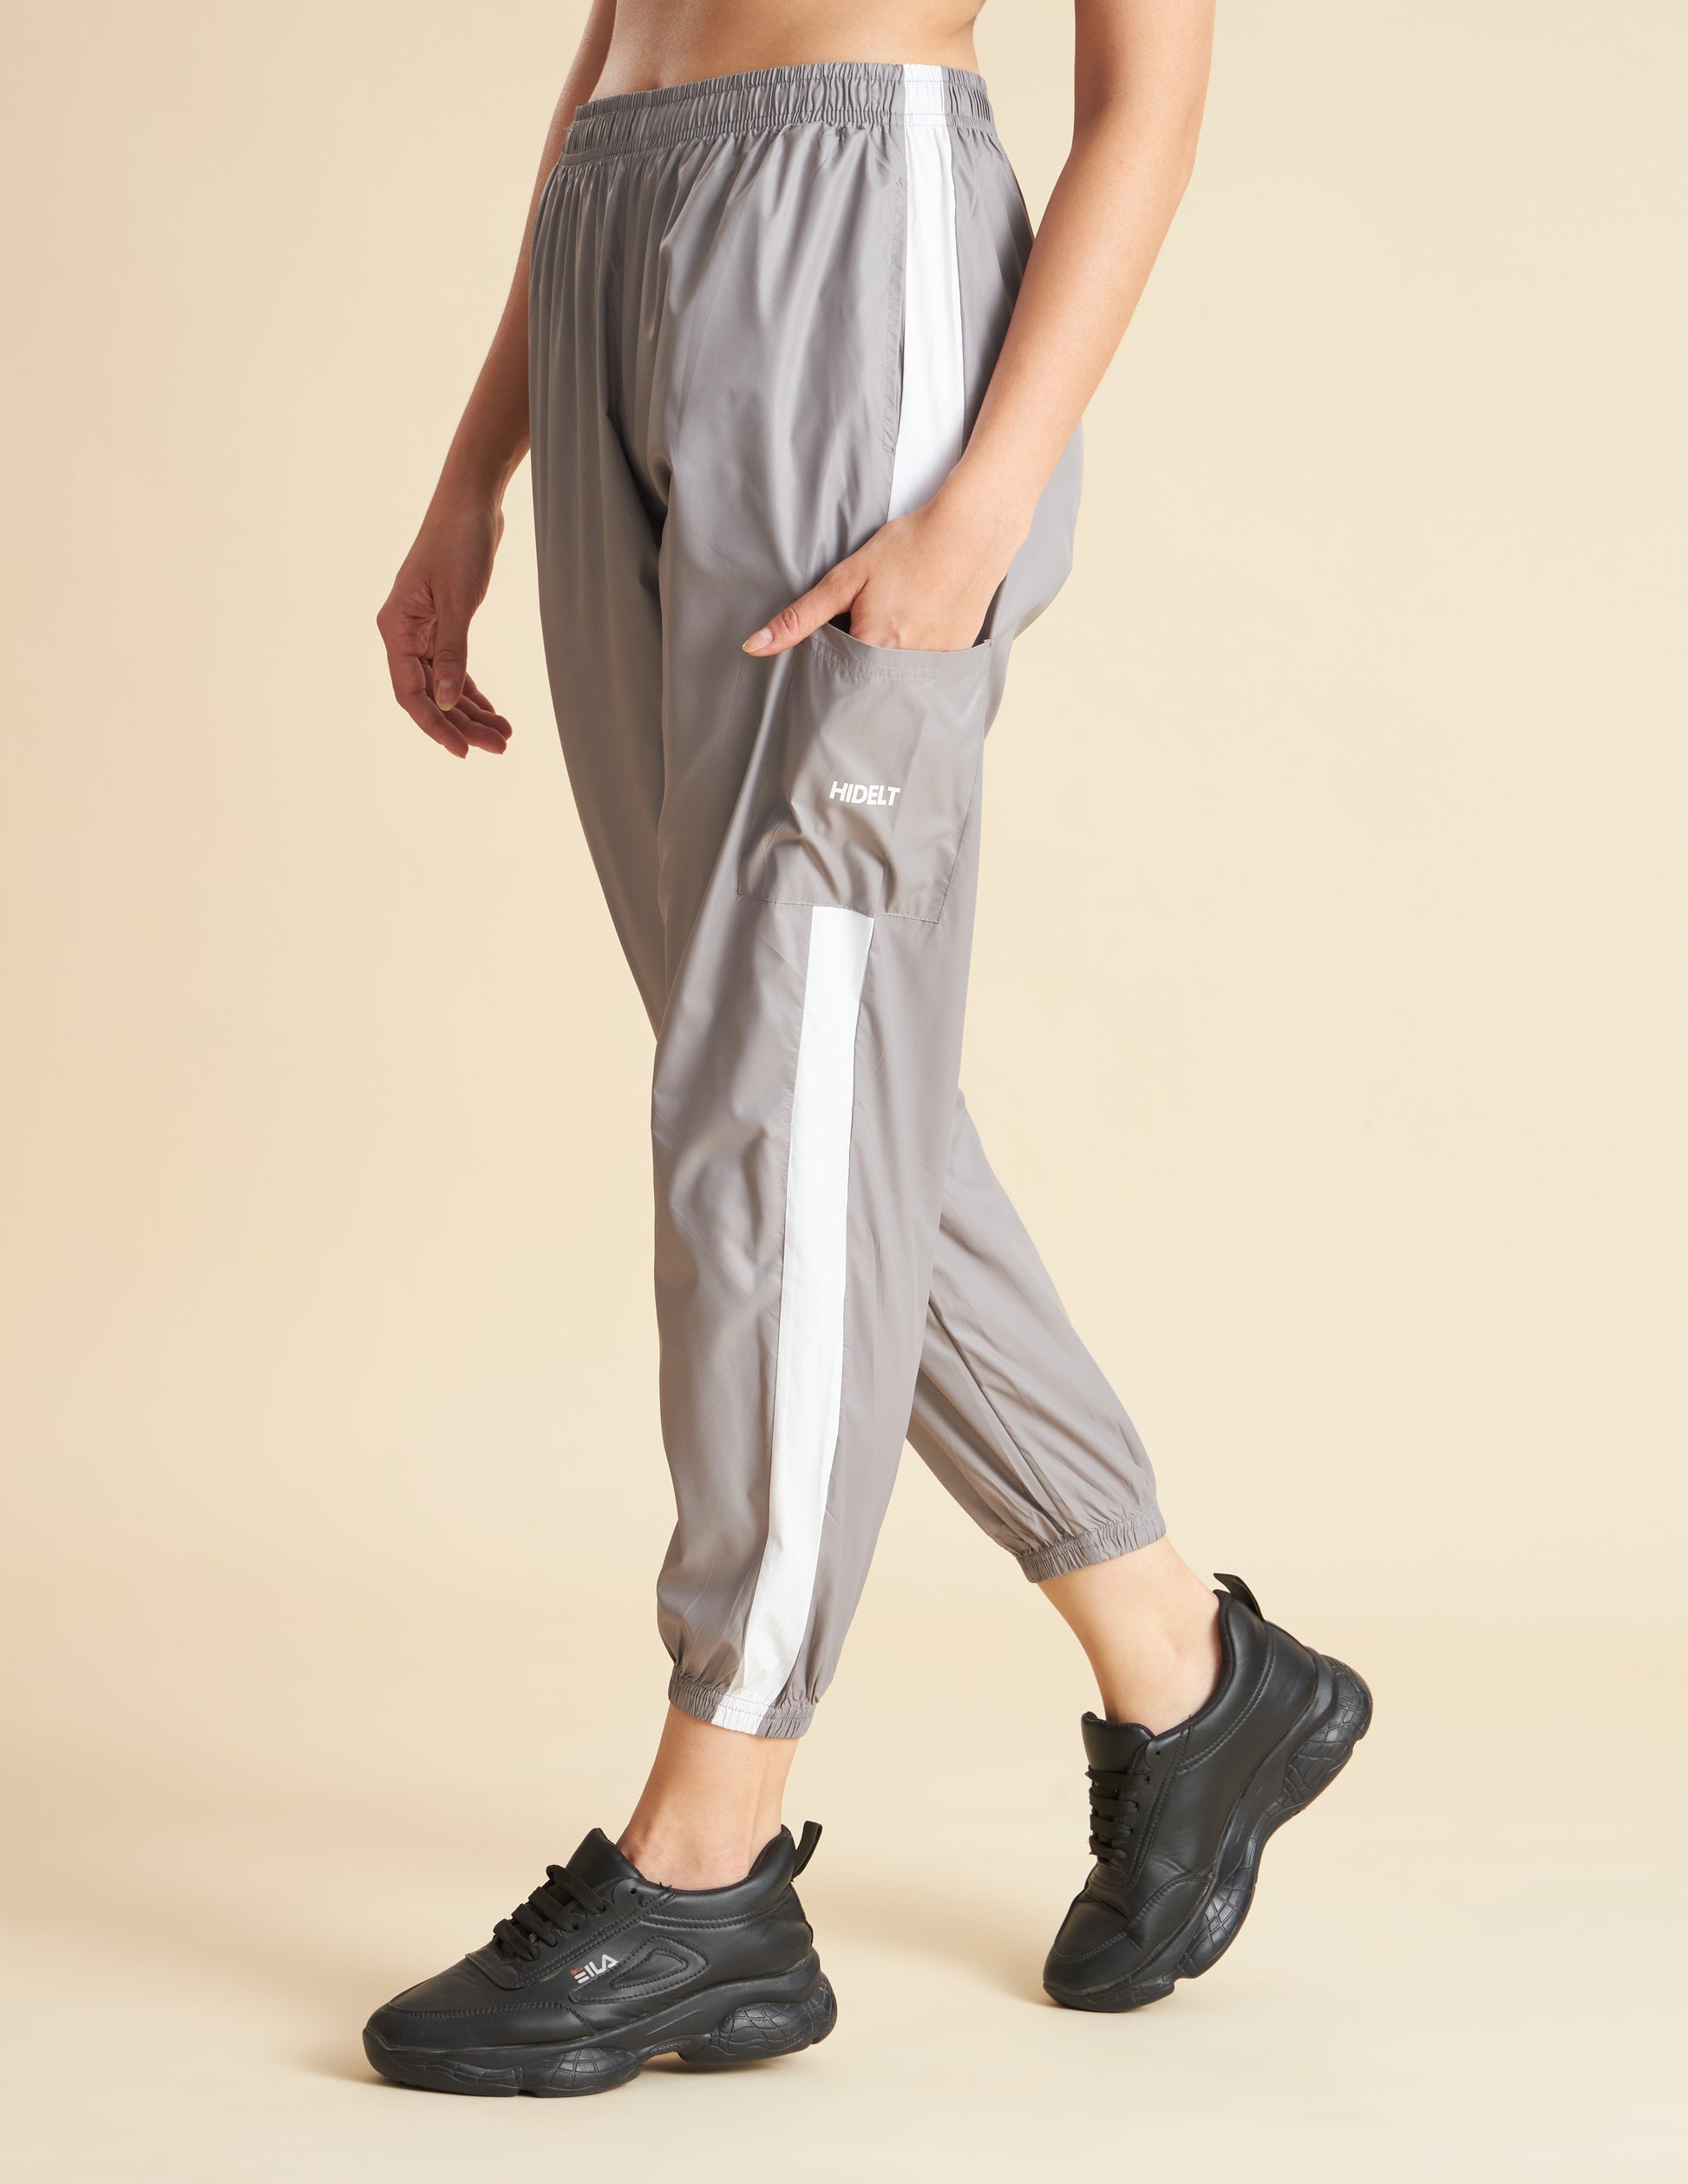 Buy Joggers for Women Online in India  Track pants for women  Zivame